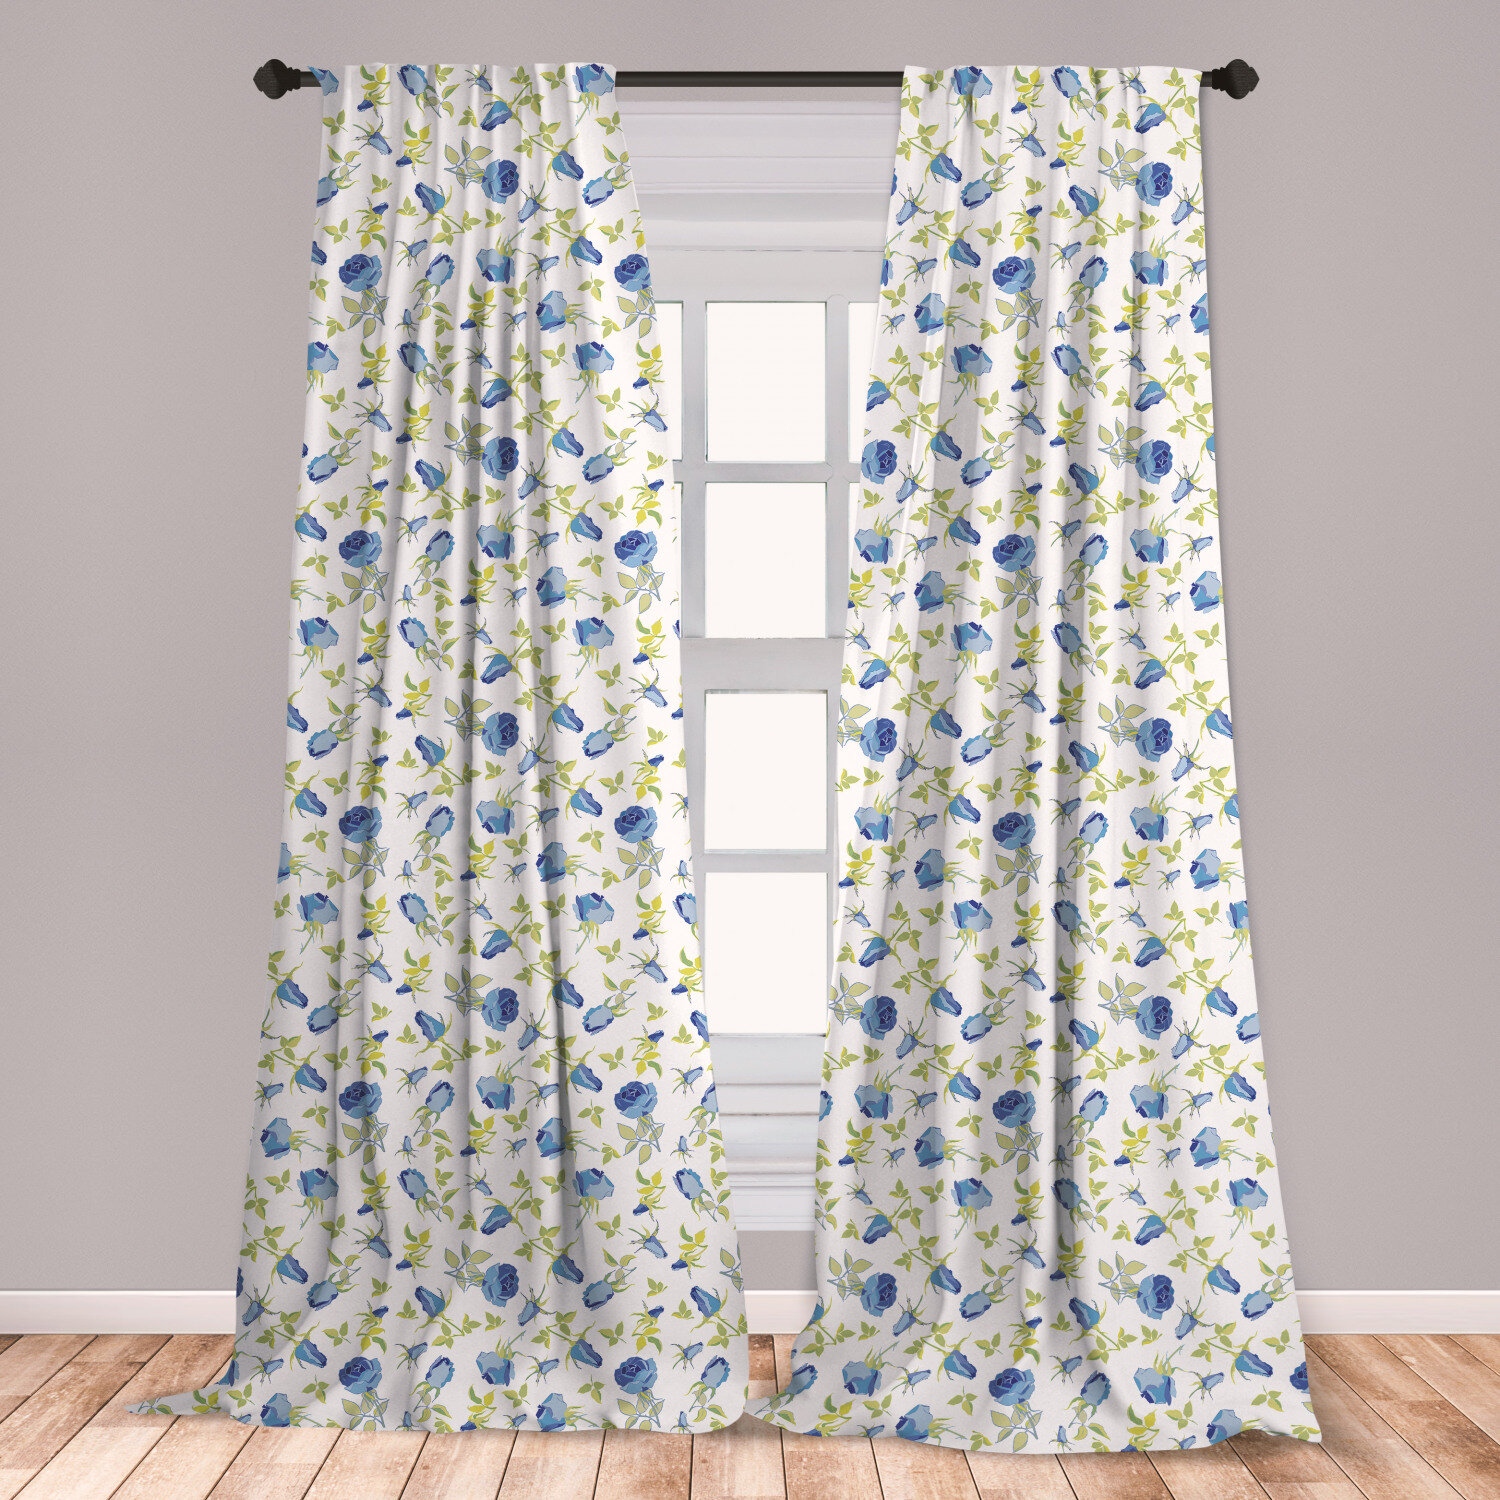 Villa Hotel Home Decor European Style Floral Rope Embroidered Floral Semi Blackout Curtain Drapes Grommet 2